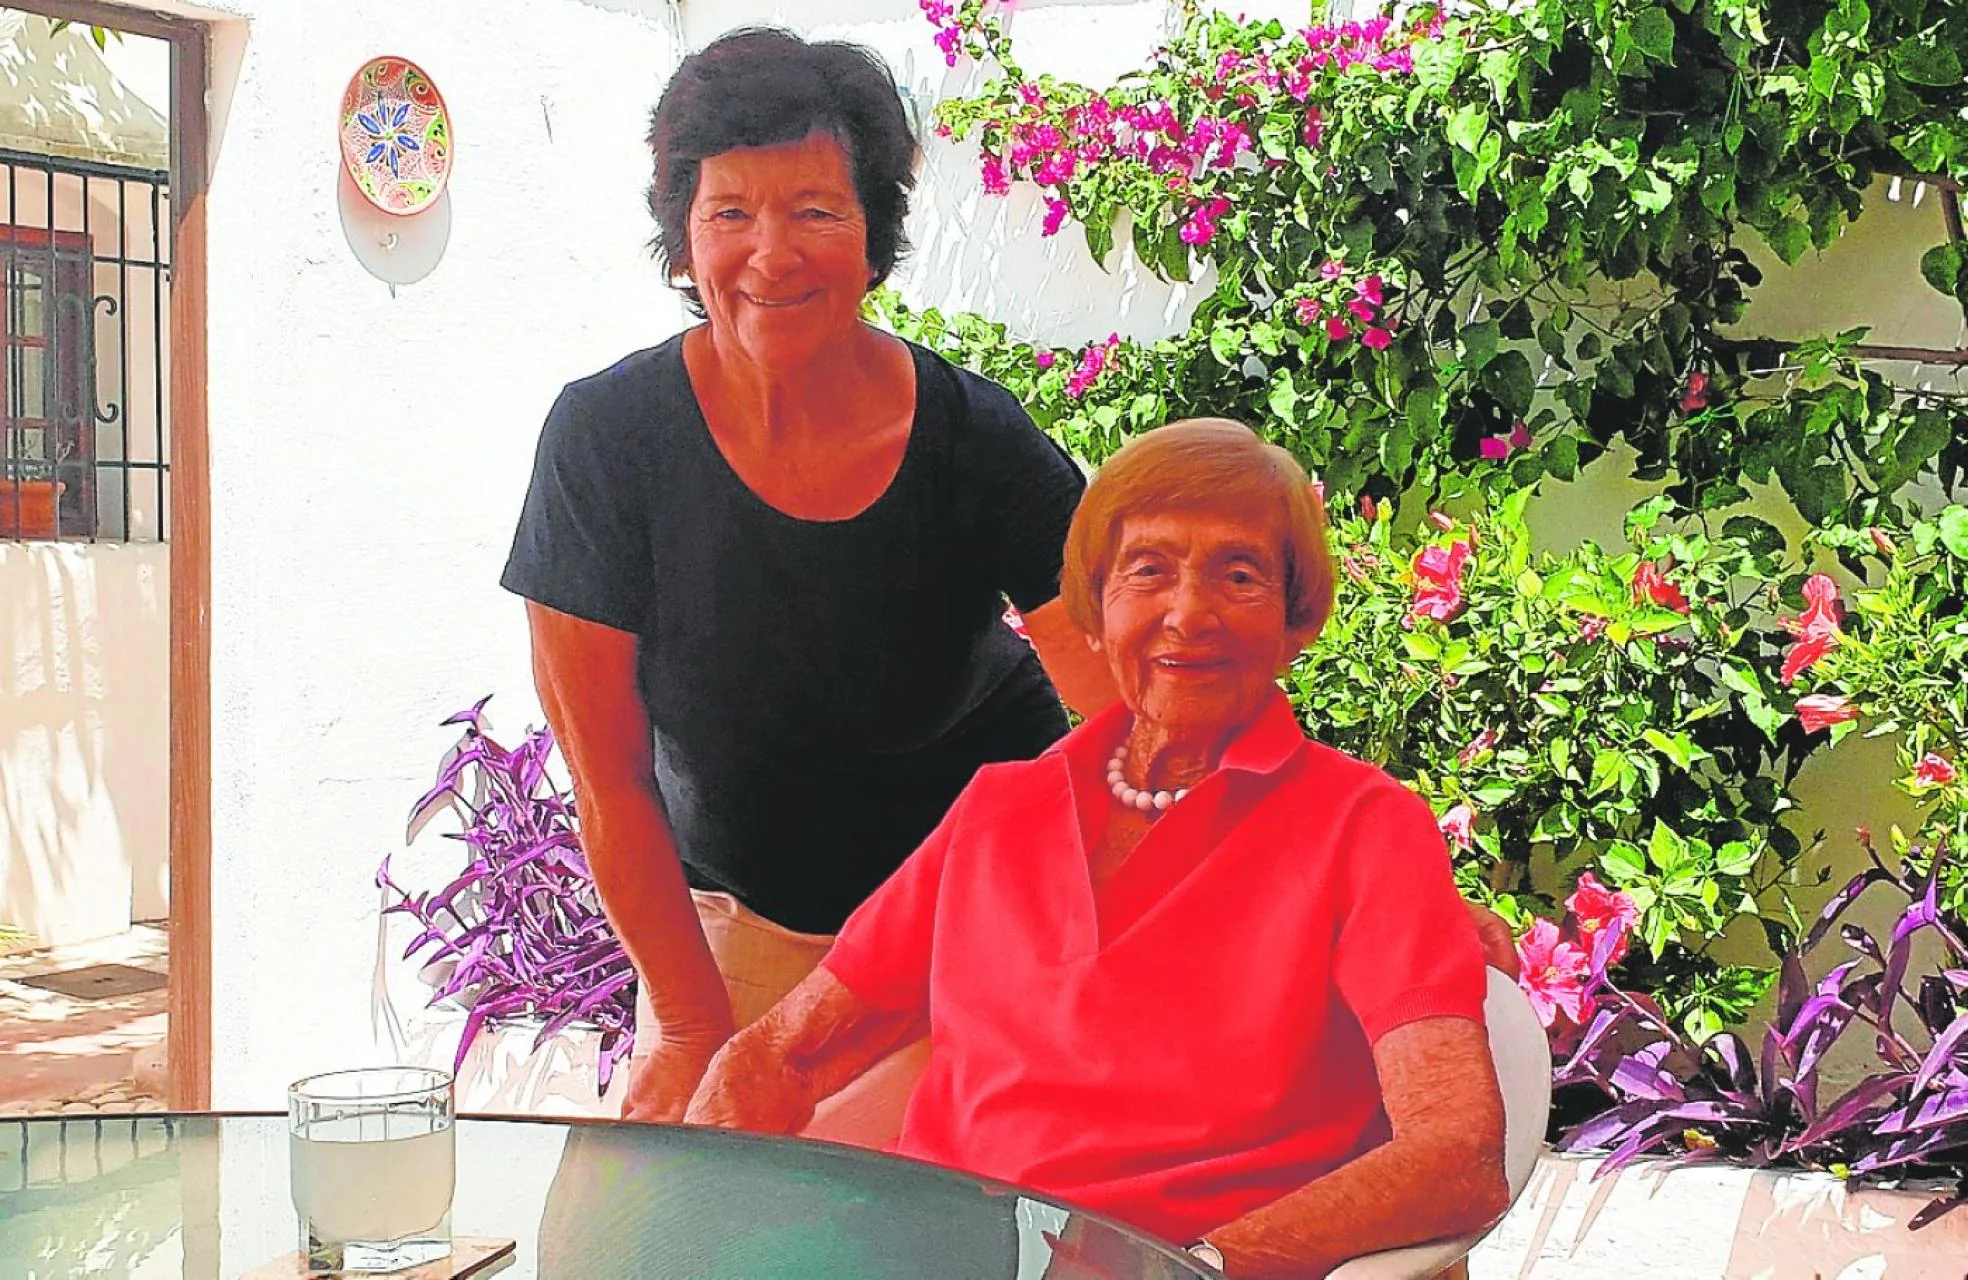 Eileen and her daughter Hilary relaxing in the garden of their home in Fuengirola. 